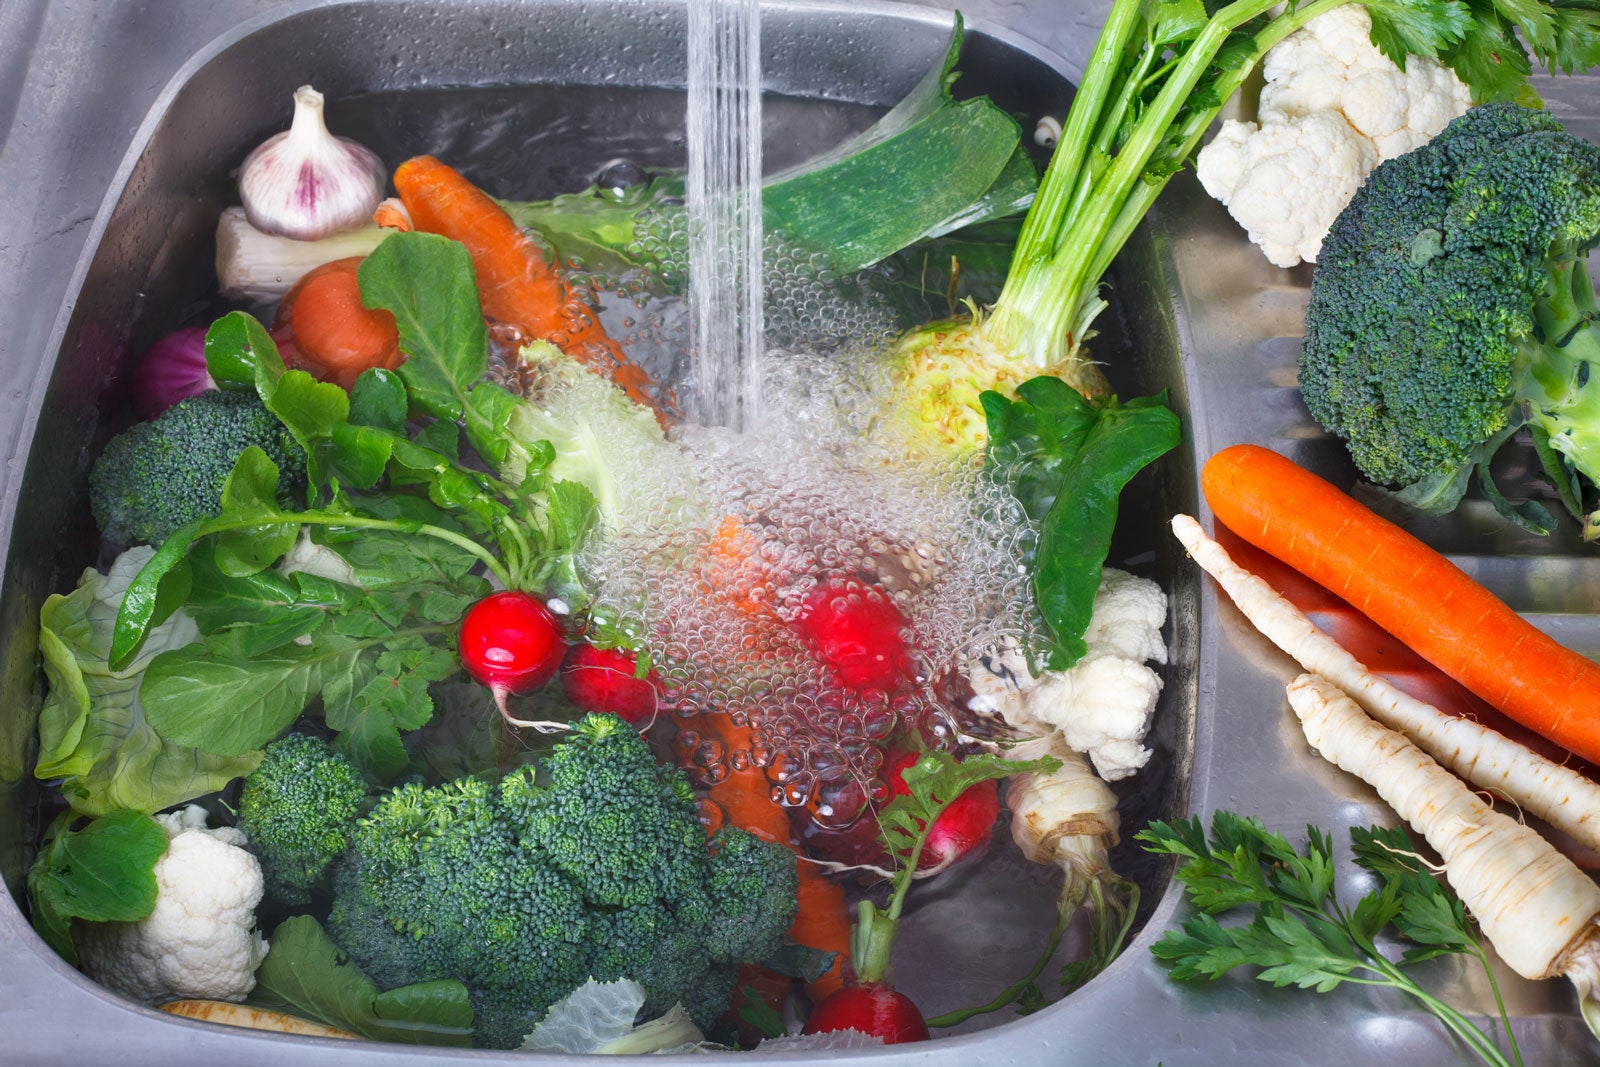 Washing Fresh Vegetables - How To Wash Vegetables From Garden